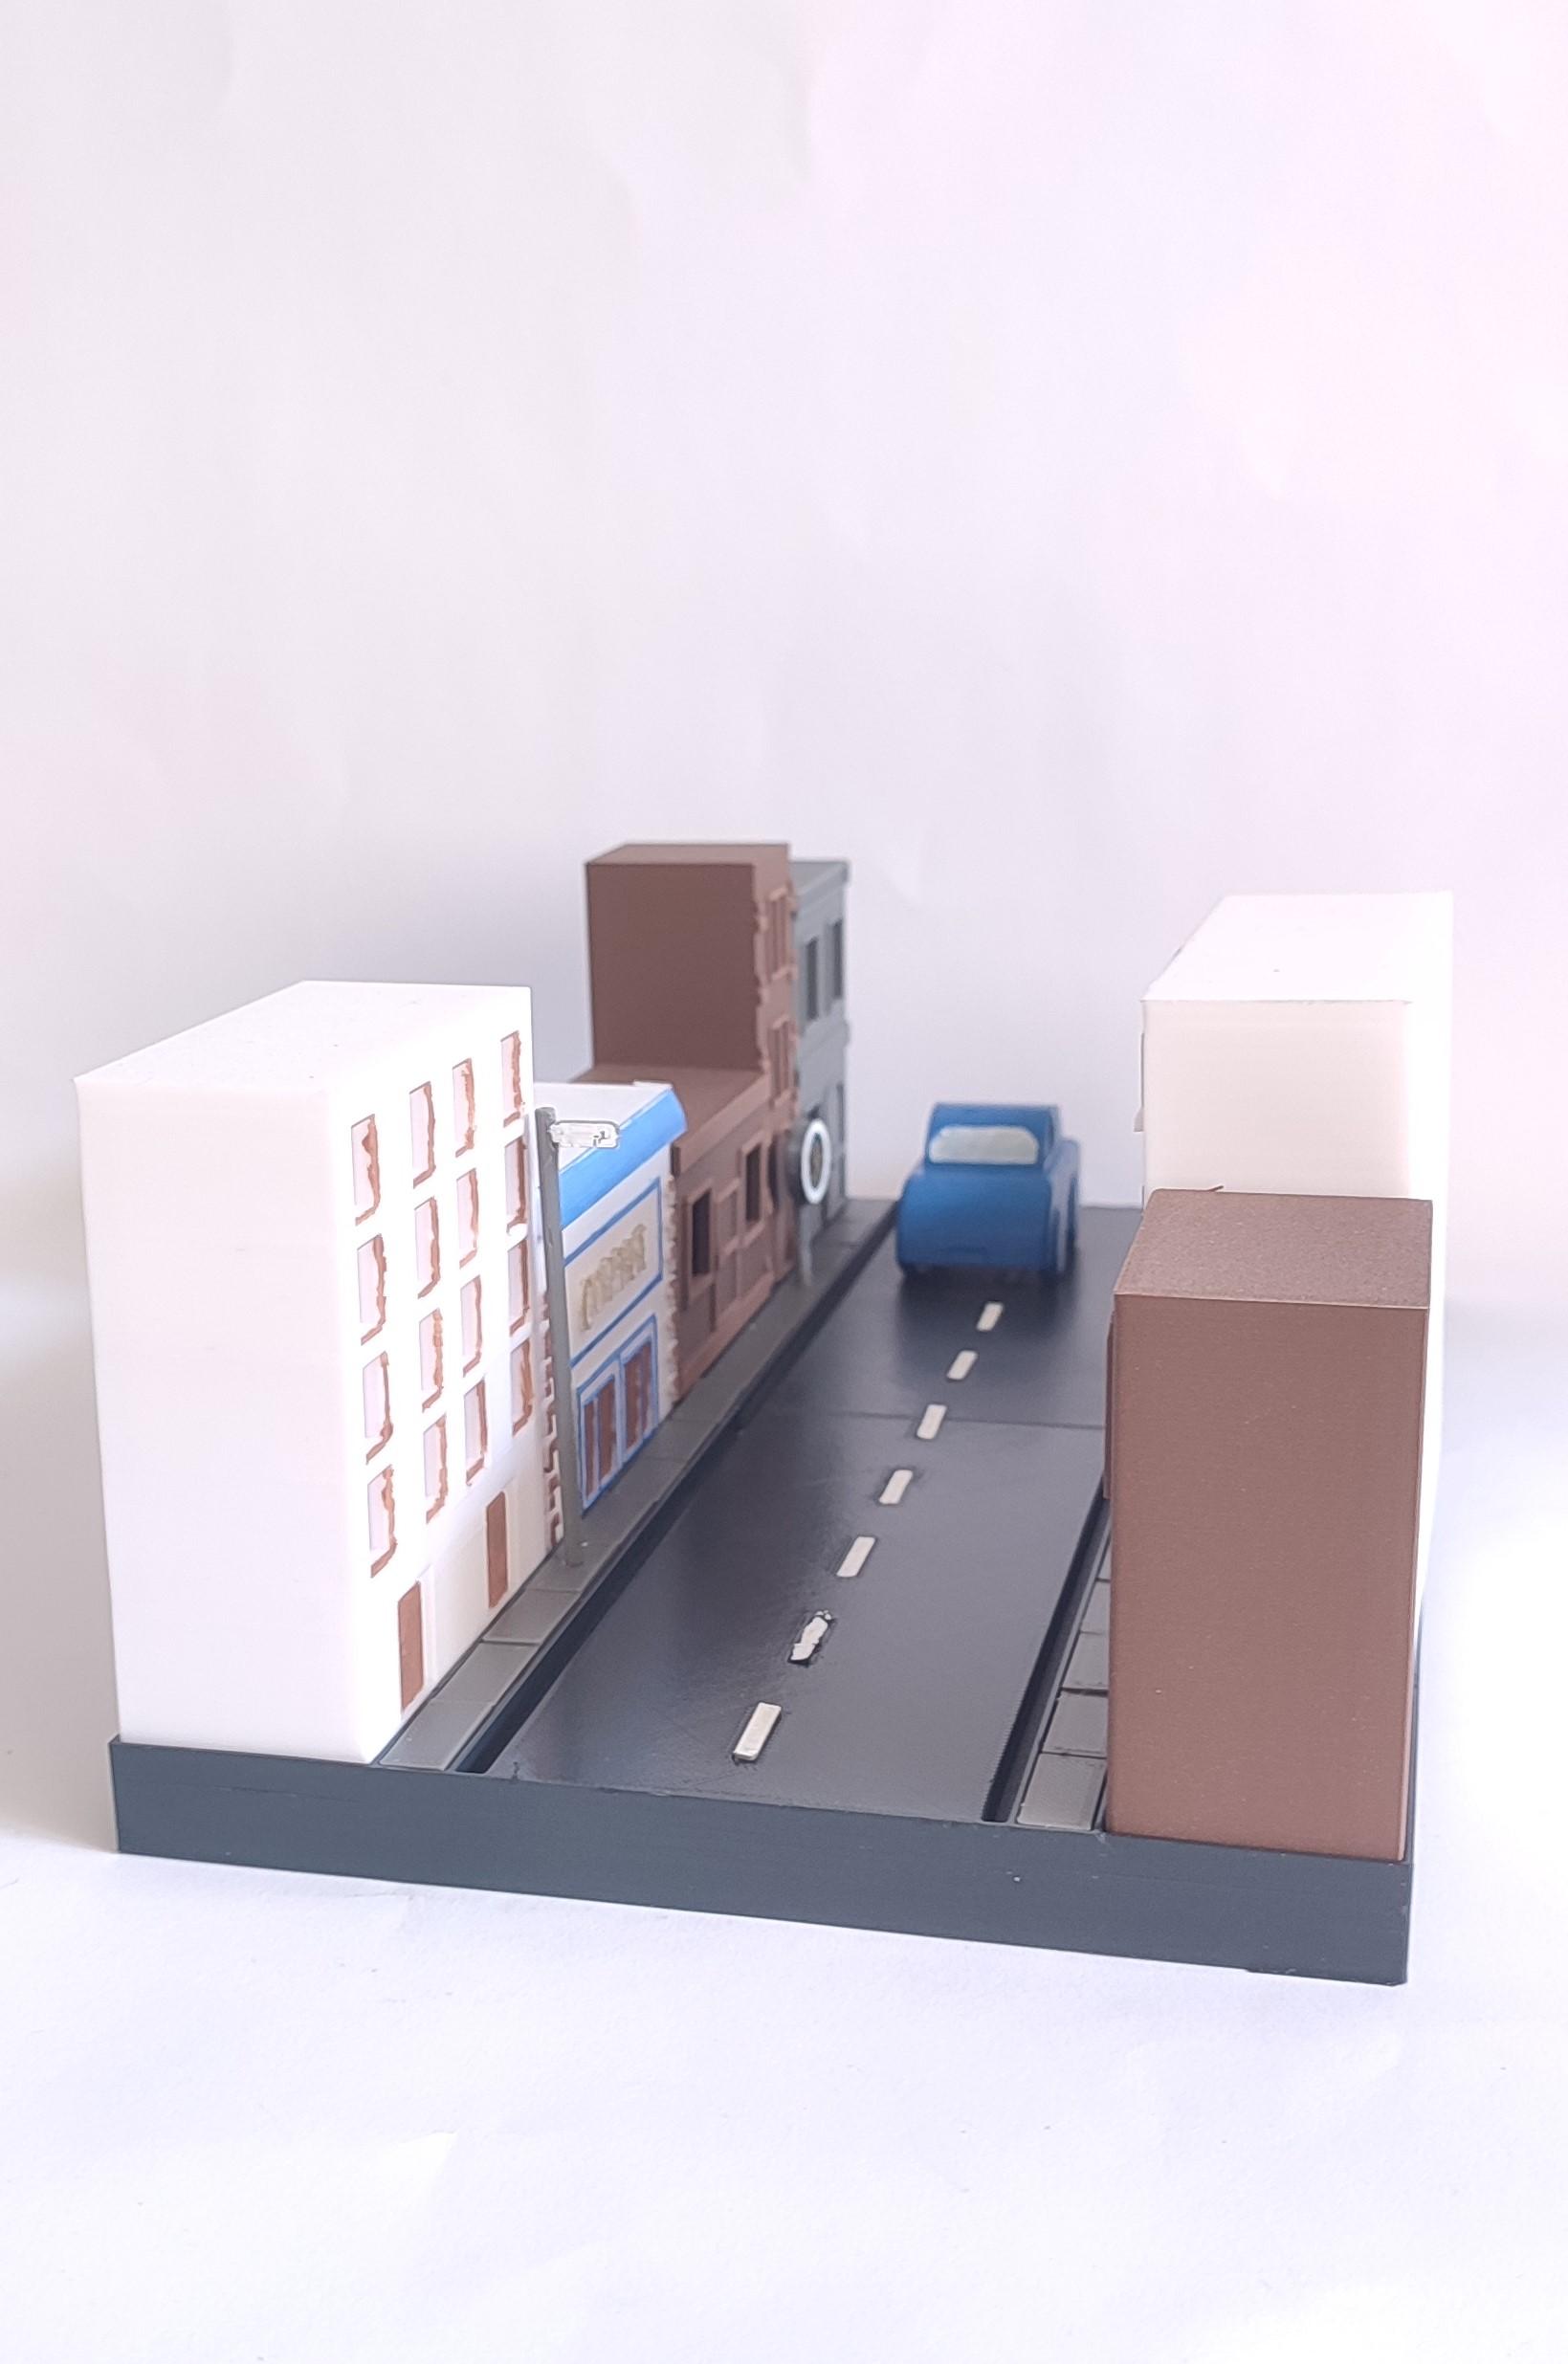 STREET WITH BUILDINGS 3d model